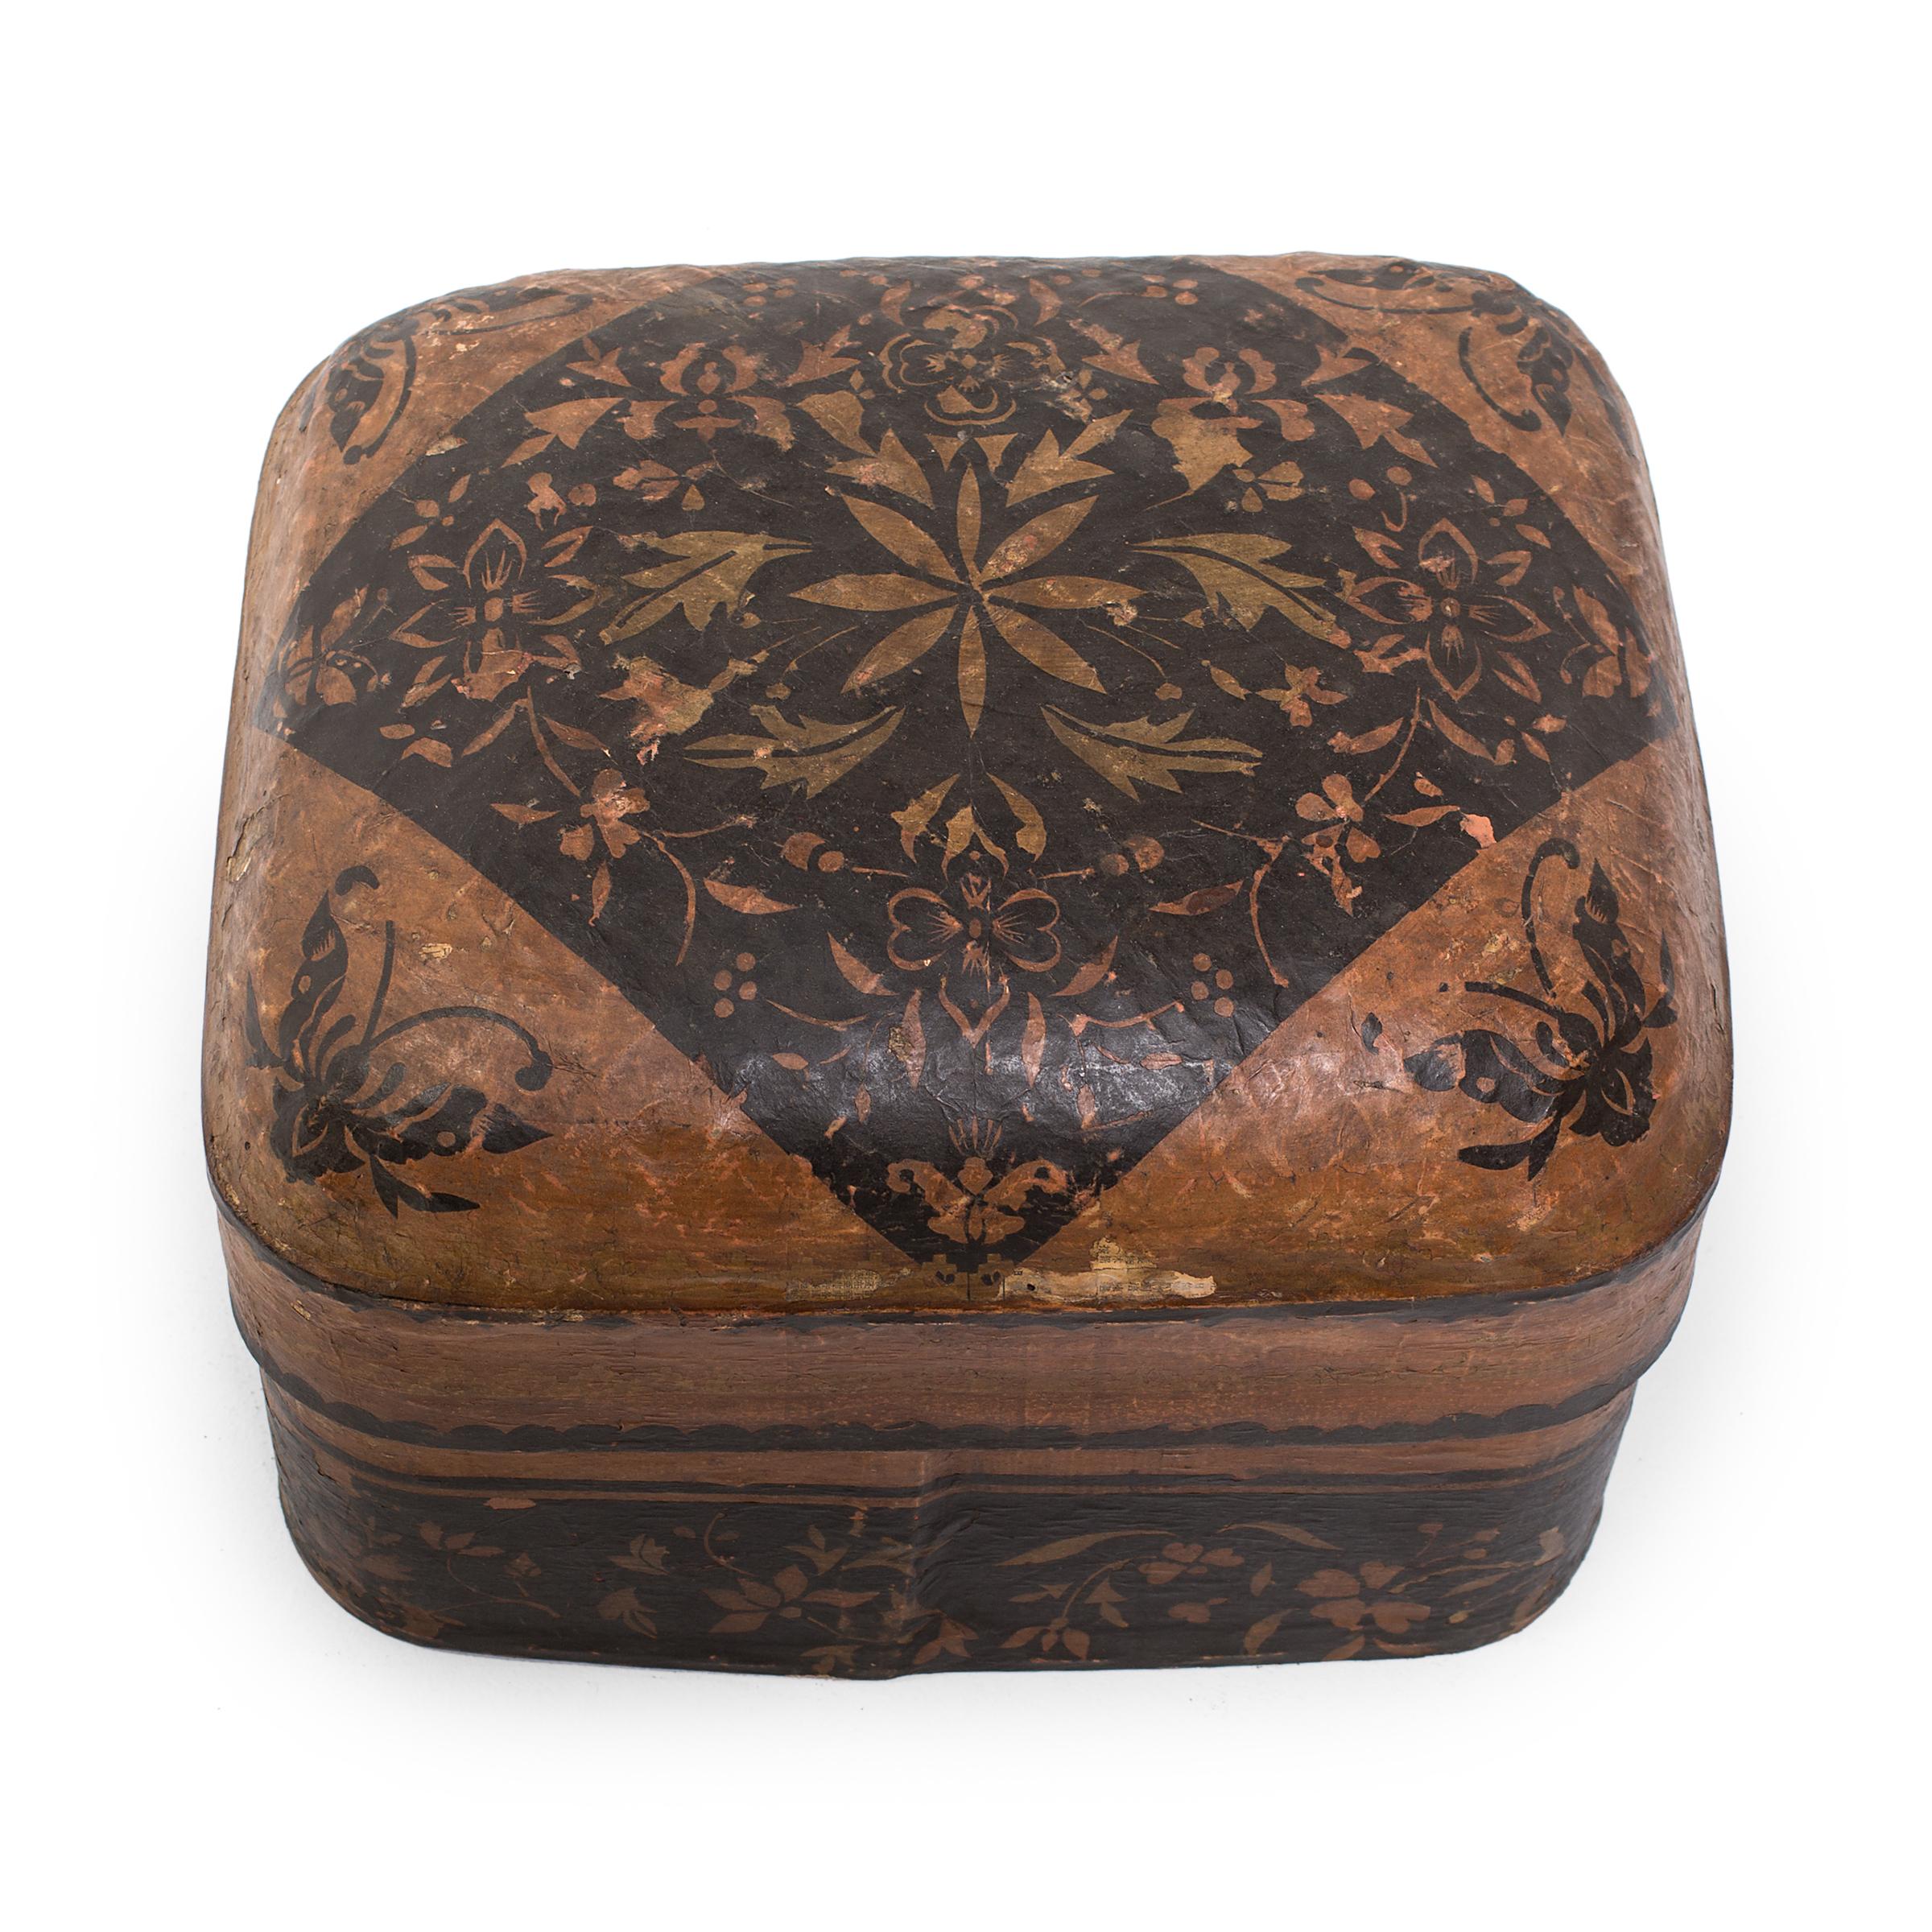 Formed around a simple wooden frame, this papier mâché storage box is a delightful example of Chinese Folk Art. Crafted with old newspapers and dyed rice paper, the box would have been used for basic household storage. Delicate black paper cuts